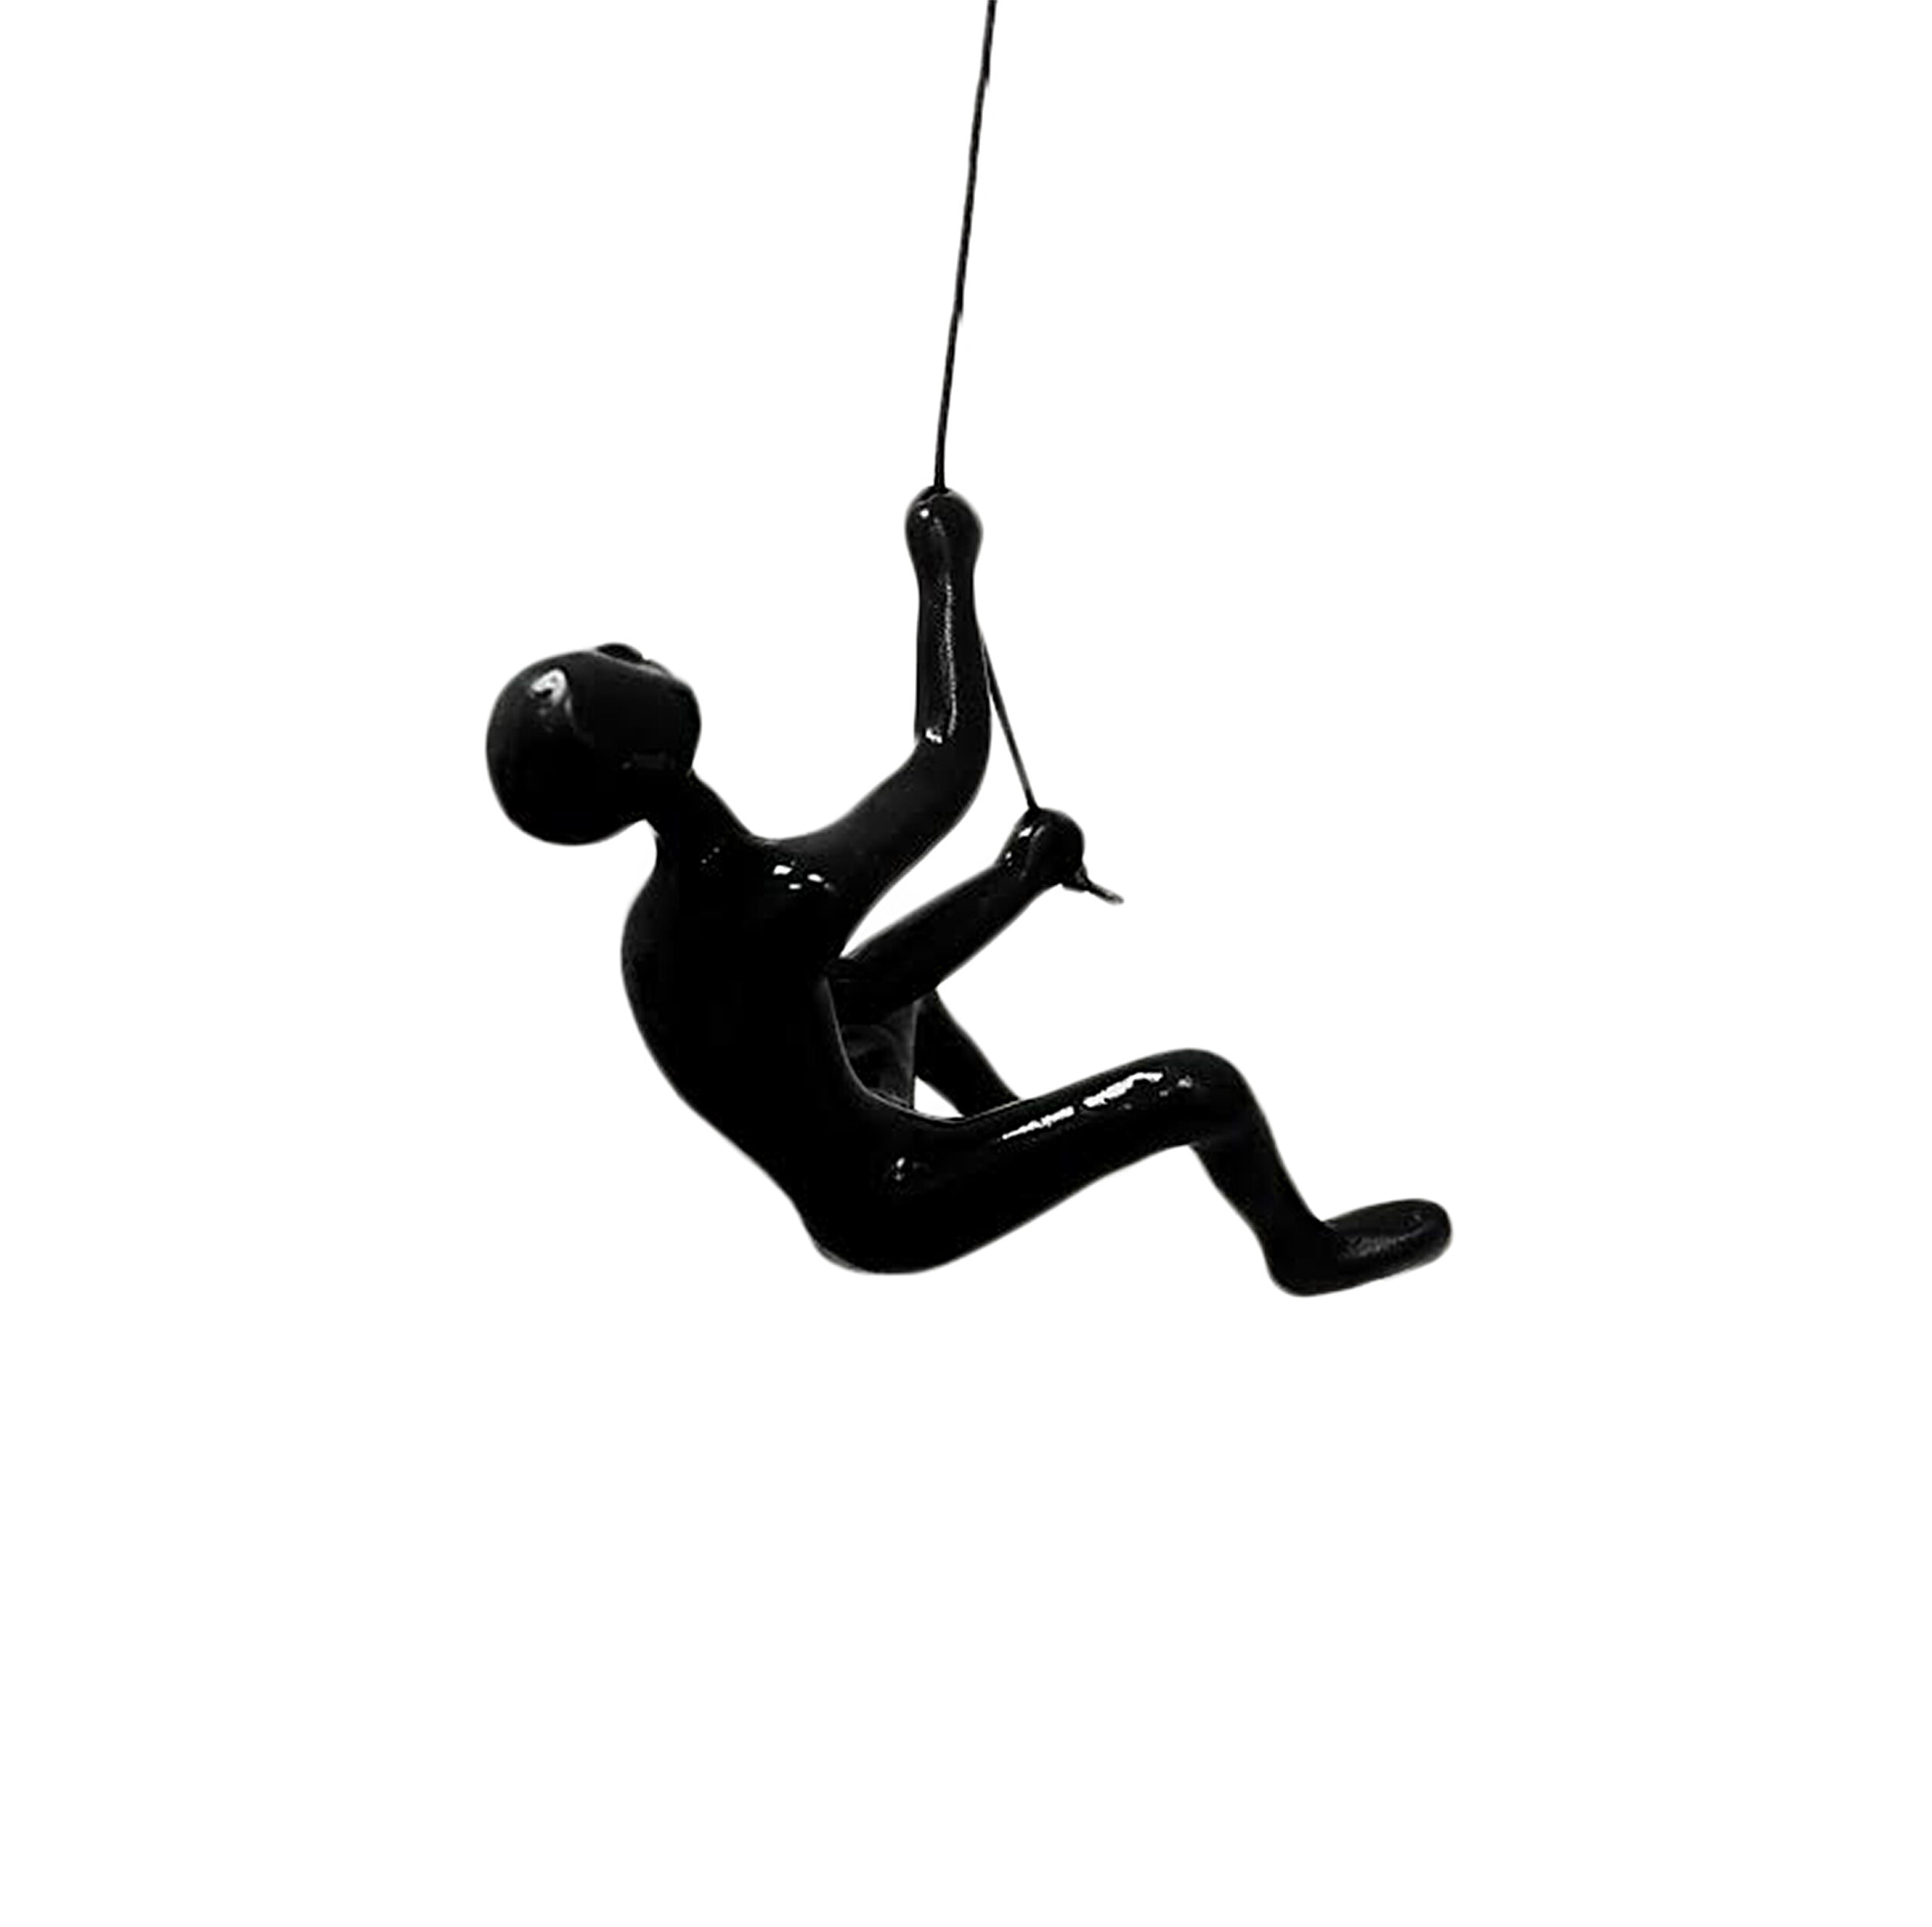 Black Right Handed Abseiling Climber Man Hanging Sculpture Home Wall Decoration 